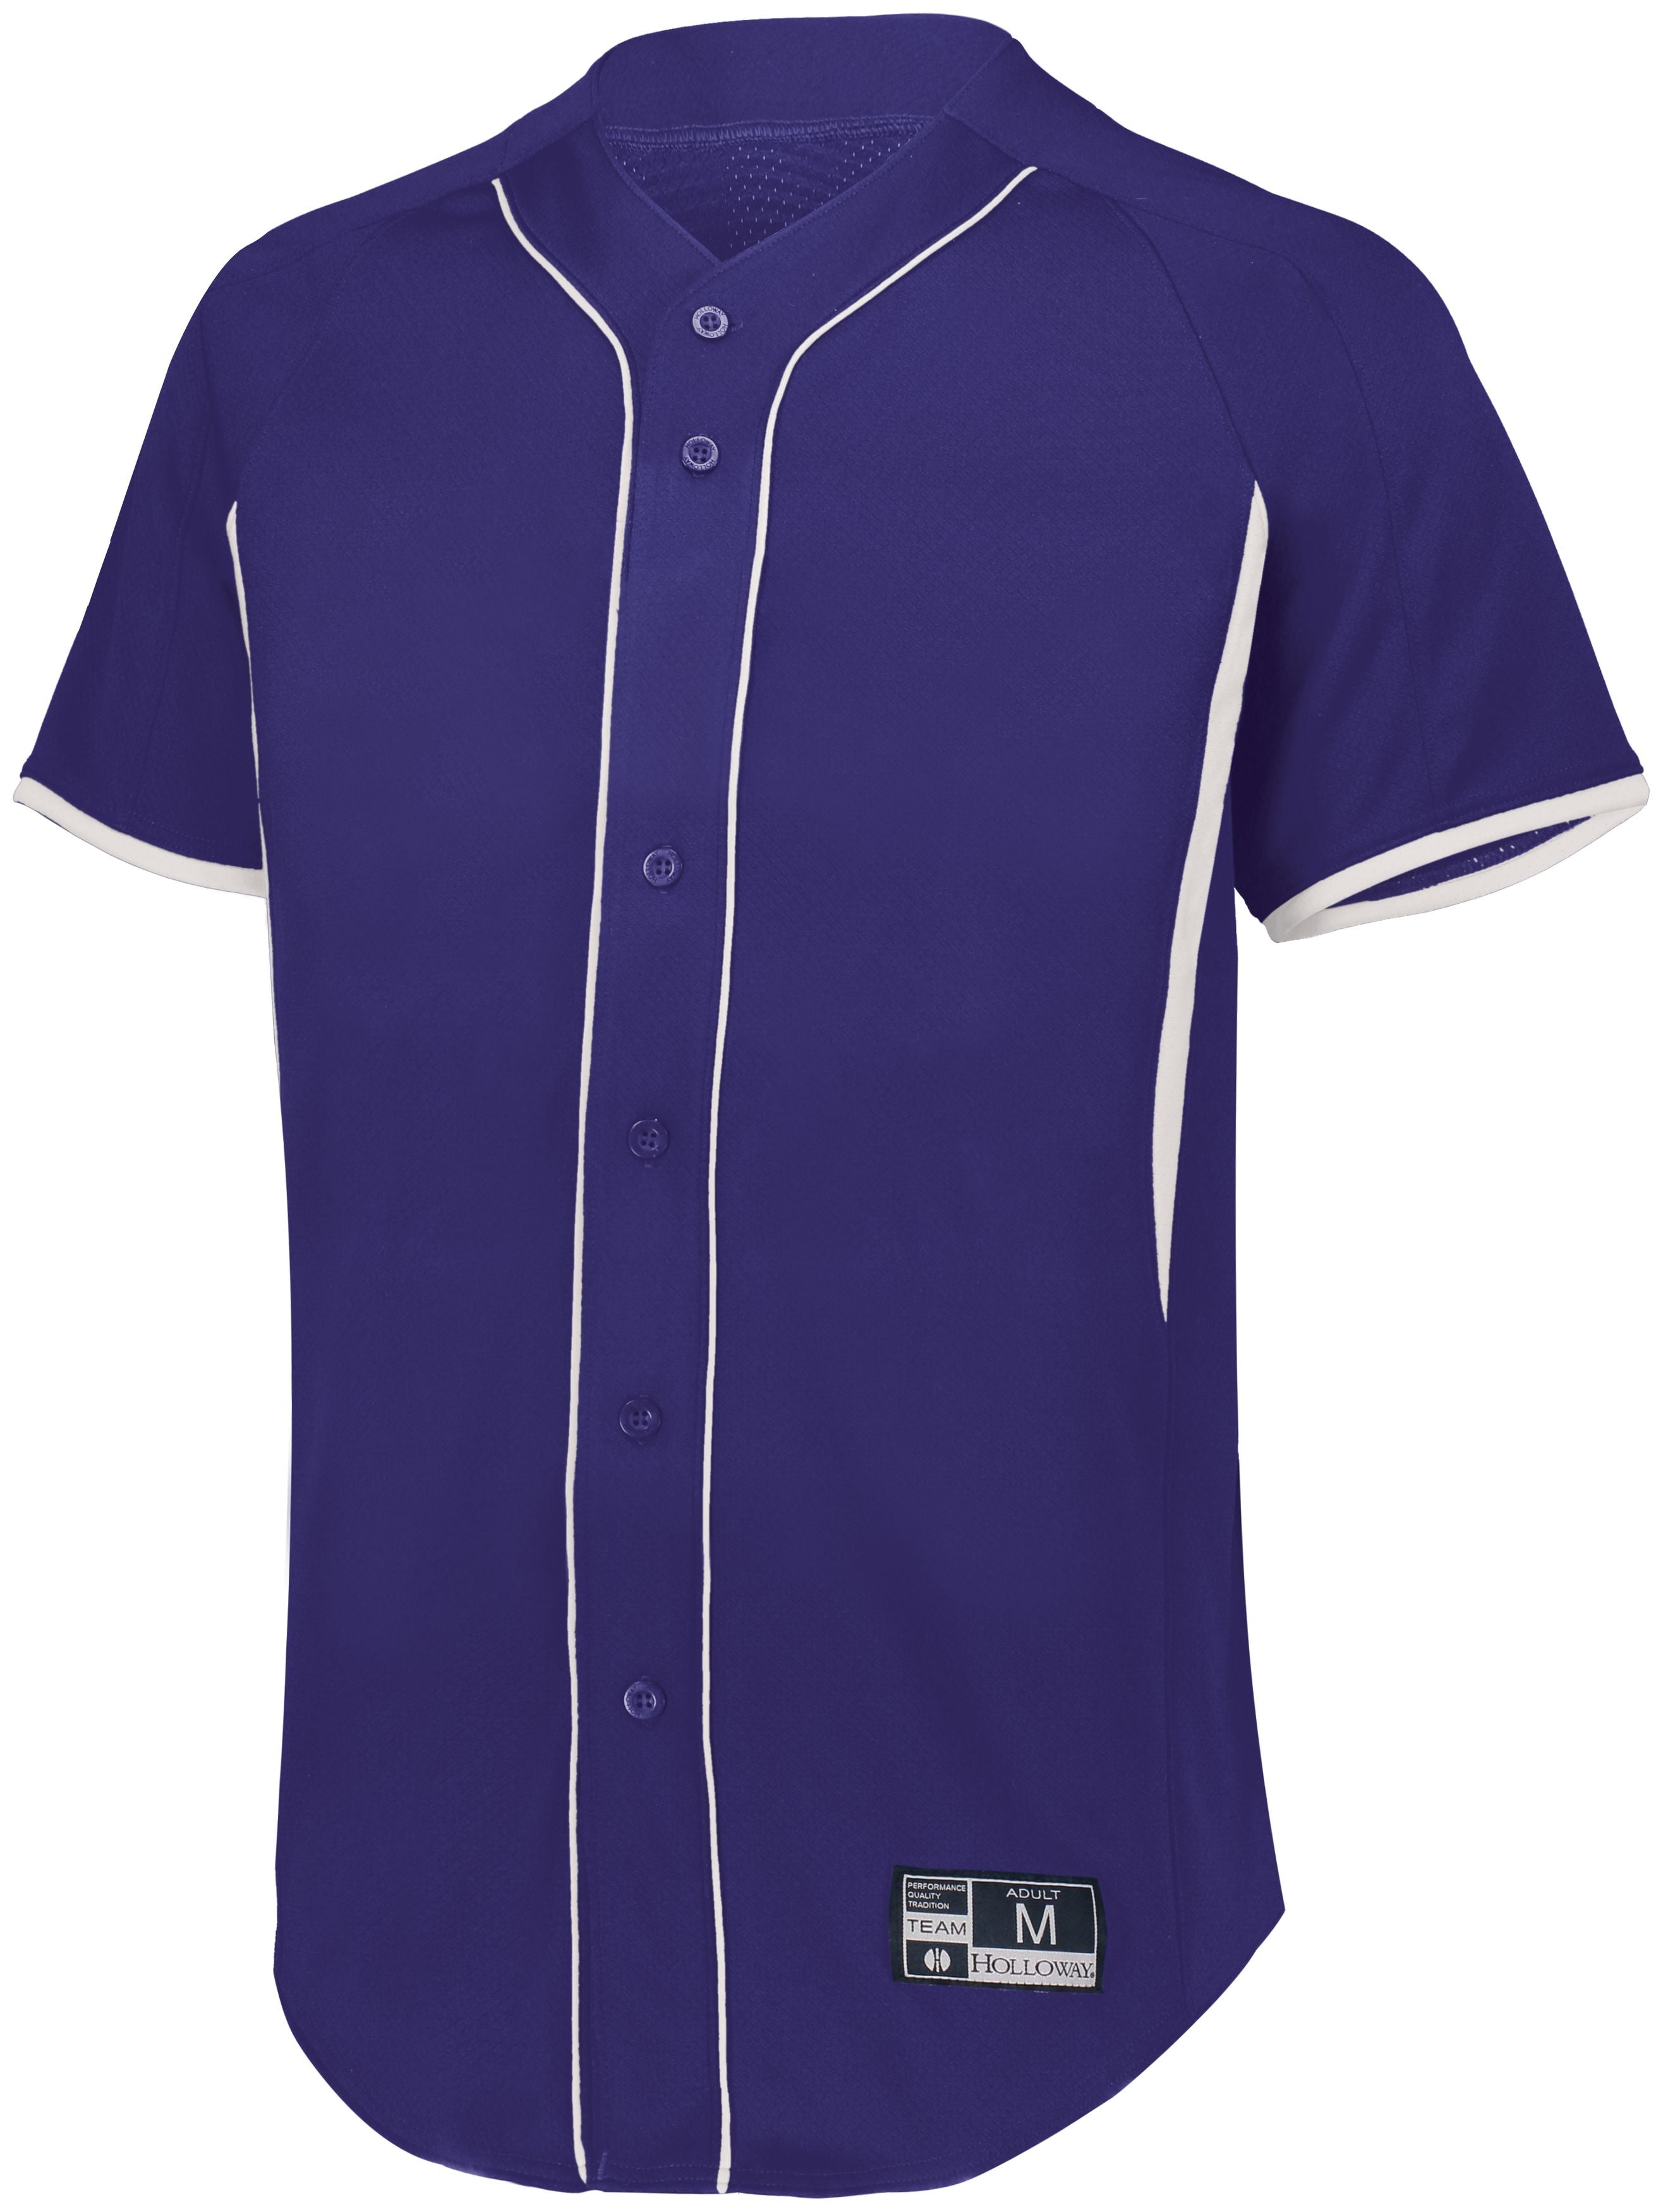 Holloway Game7 Full-Button Baseball Jersey in Purple/White  -Part of the Adult, Adult-Jersey, Baseball, Holloway, Shirts, All-Sports, All-Sports-1 product lines at KanaleyCreations.com